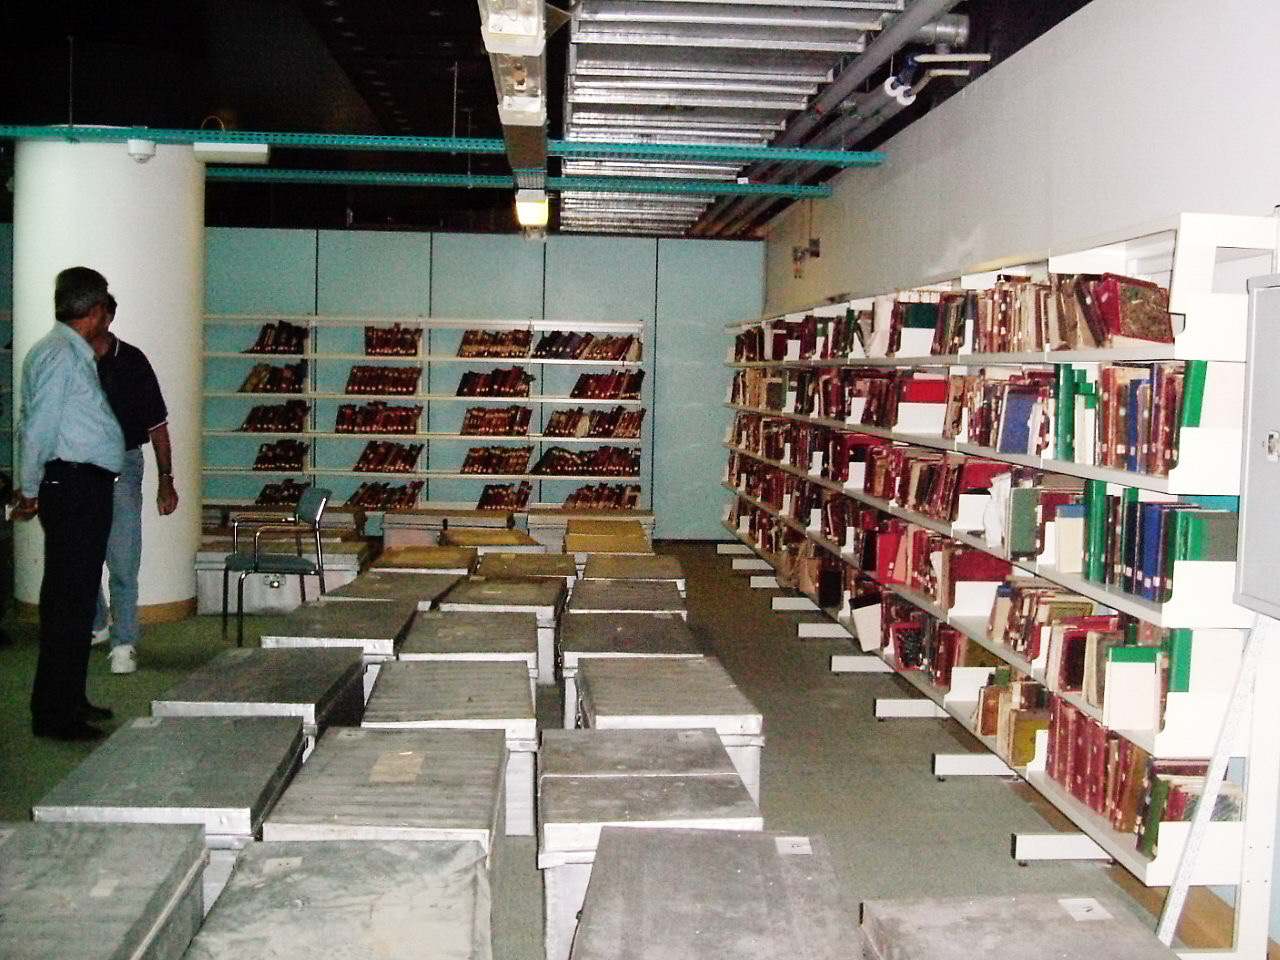 Aluminum boxes and shelved manuscripts in the bomb shelter